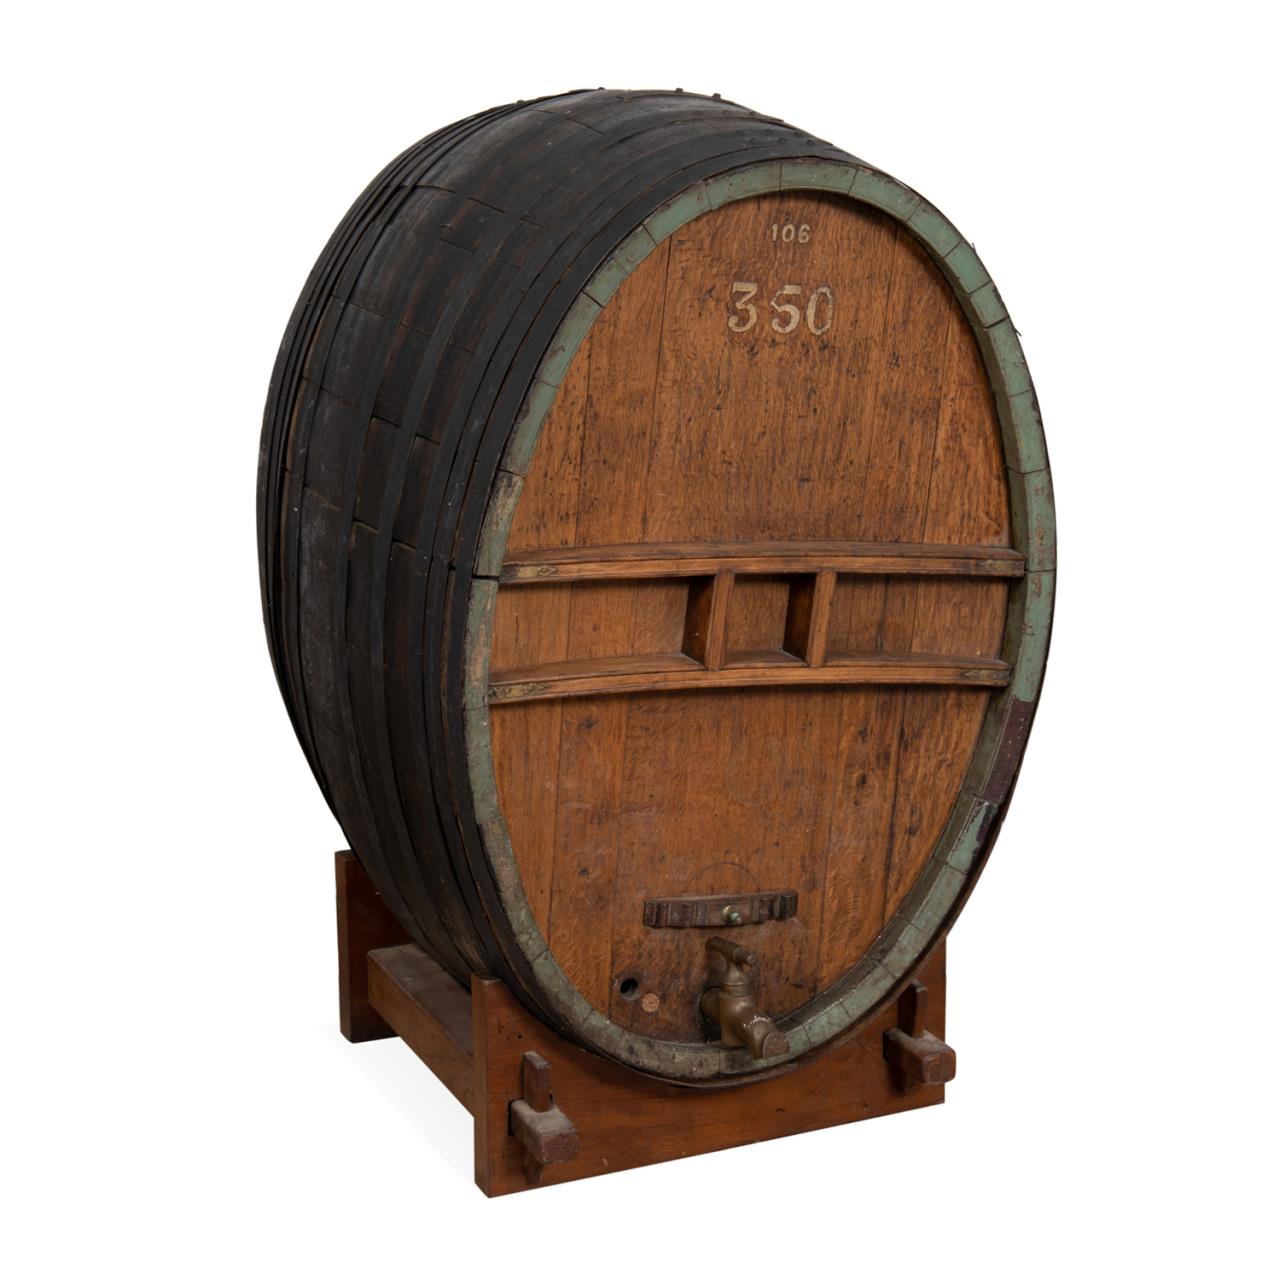 LARGE FRENCH OAK WINE BARREL ON 2bfd59